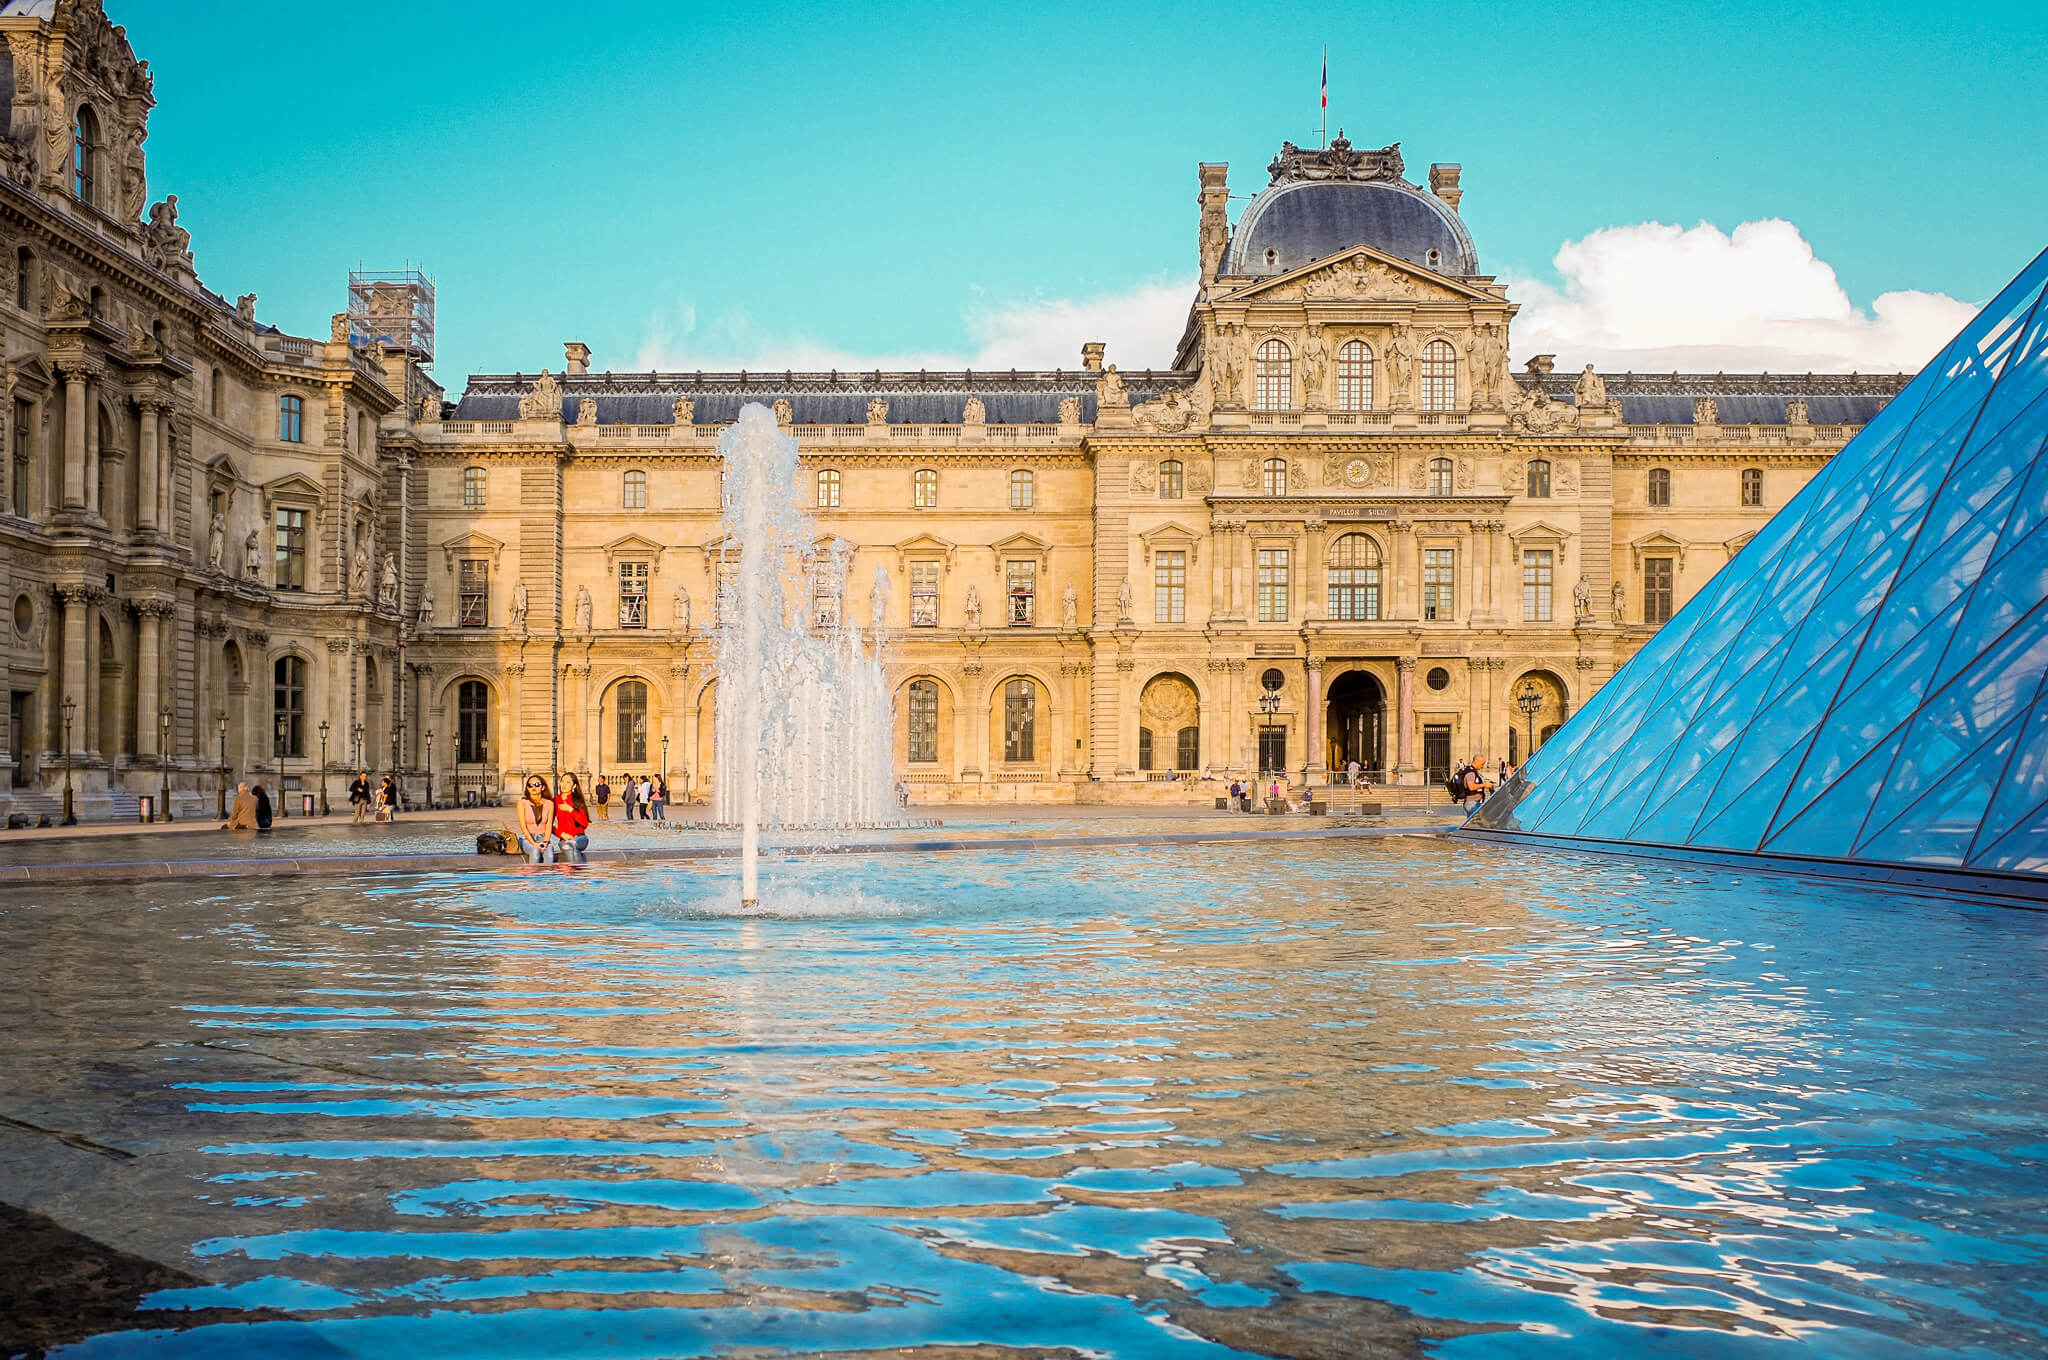 The exterior of the Louvre with the pyramid fountain in the foreground